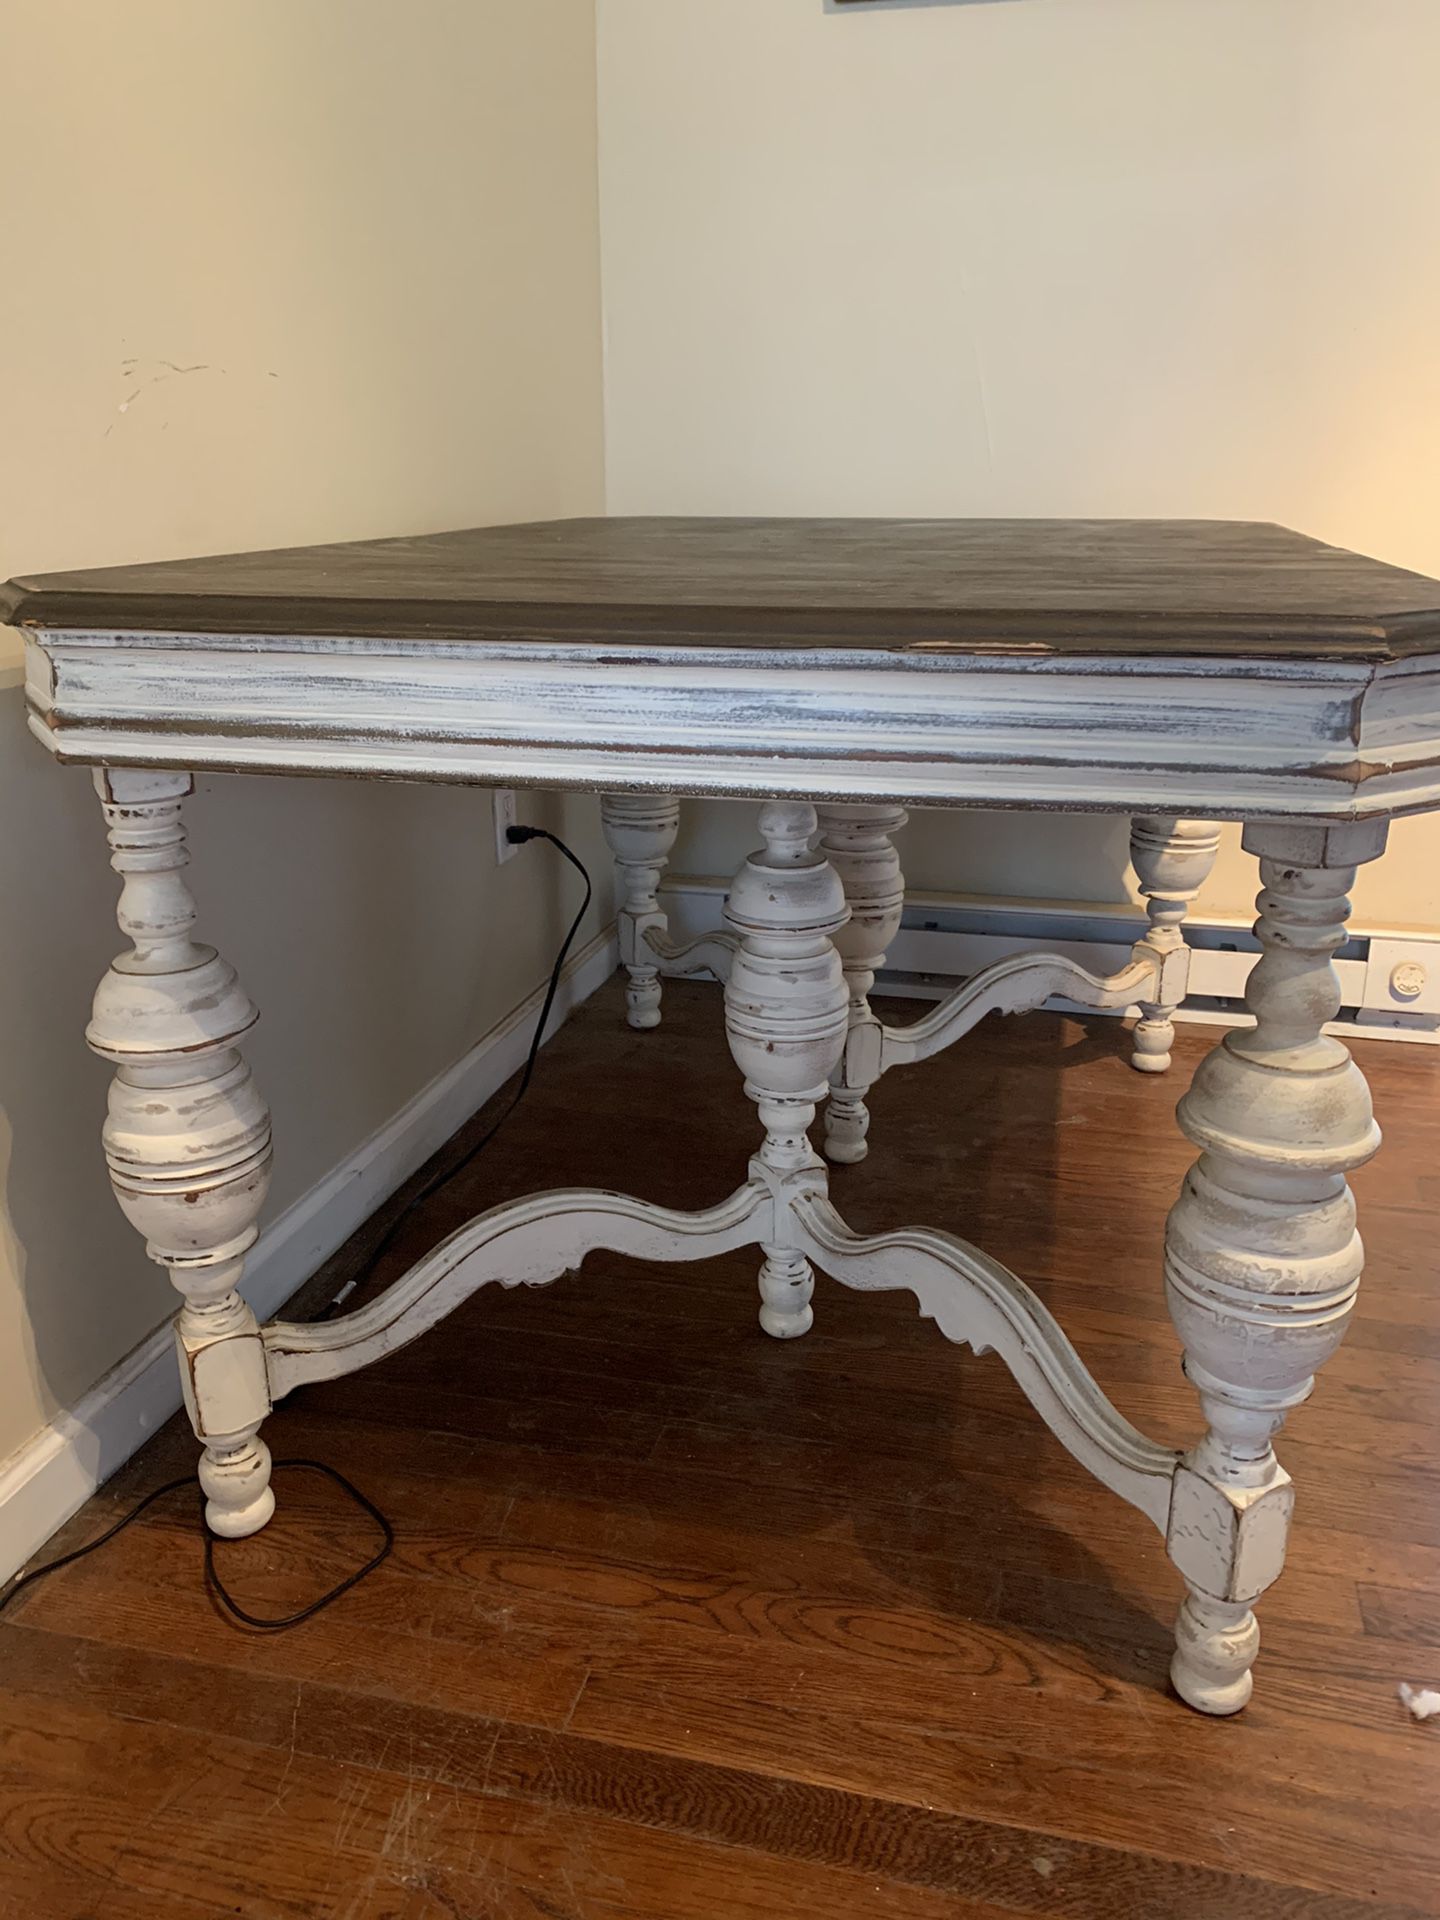 Beautiful Antique Table!